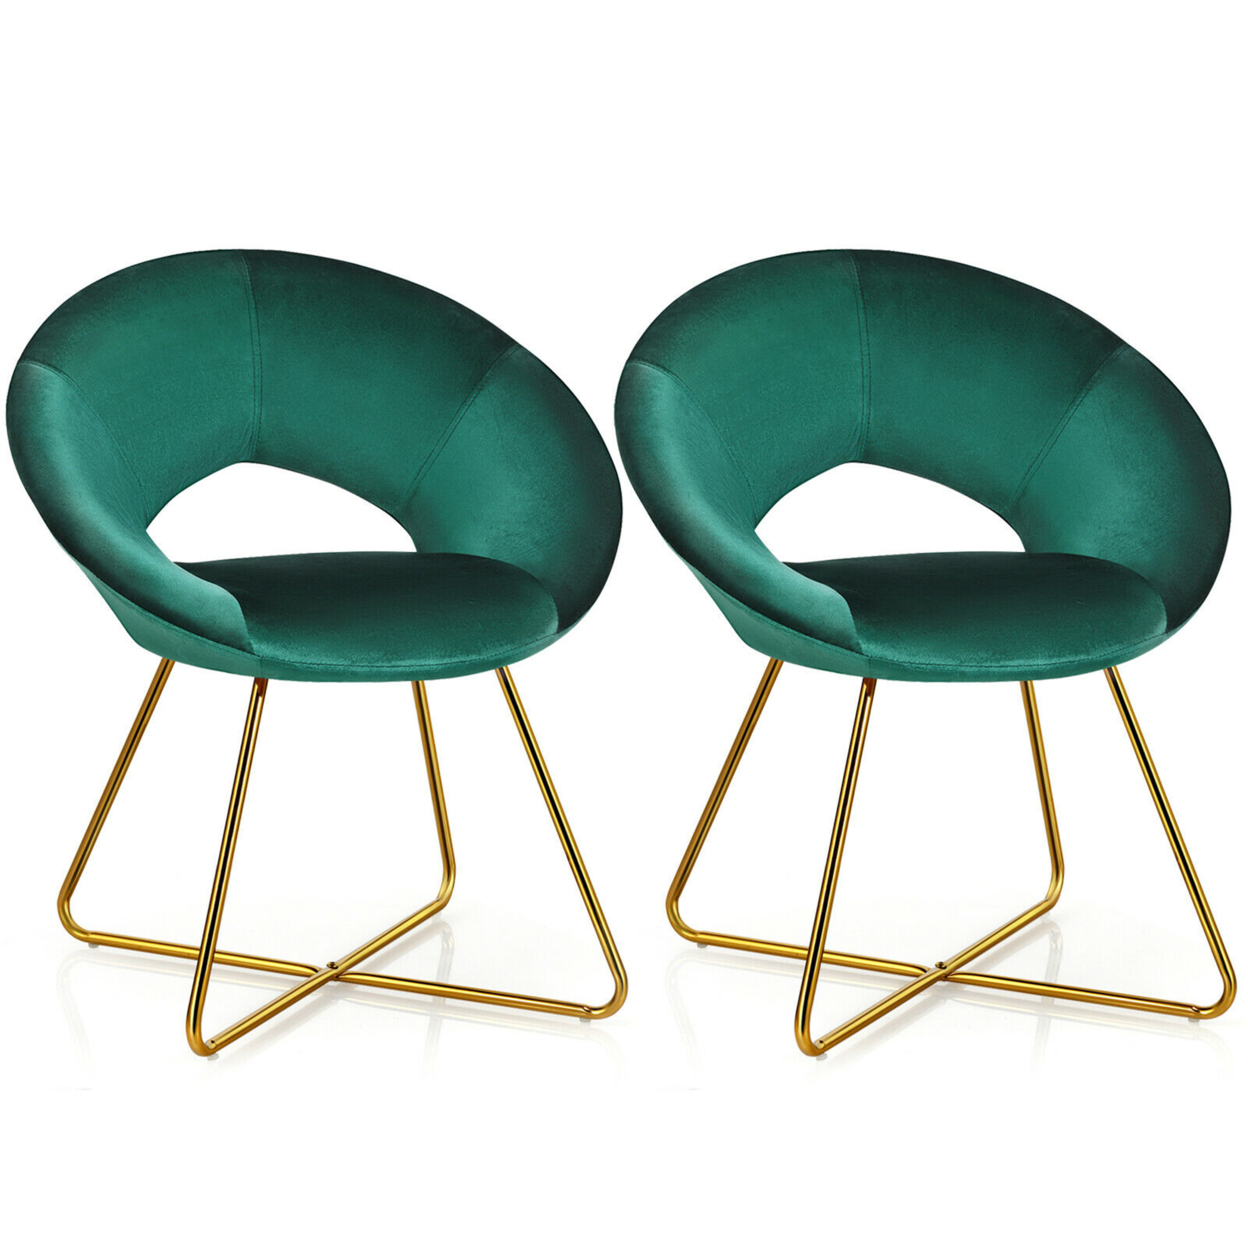 Gymax Set Of 2 Accent Velvet Chairs Dining Chairs Arm Chair W/Golden Legs Dark Green